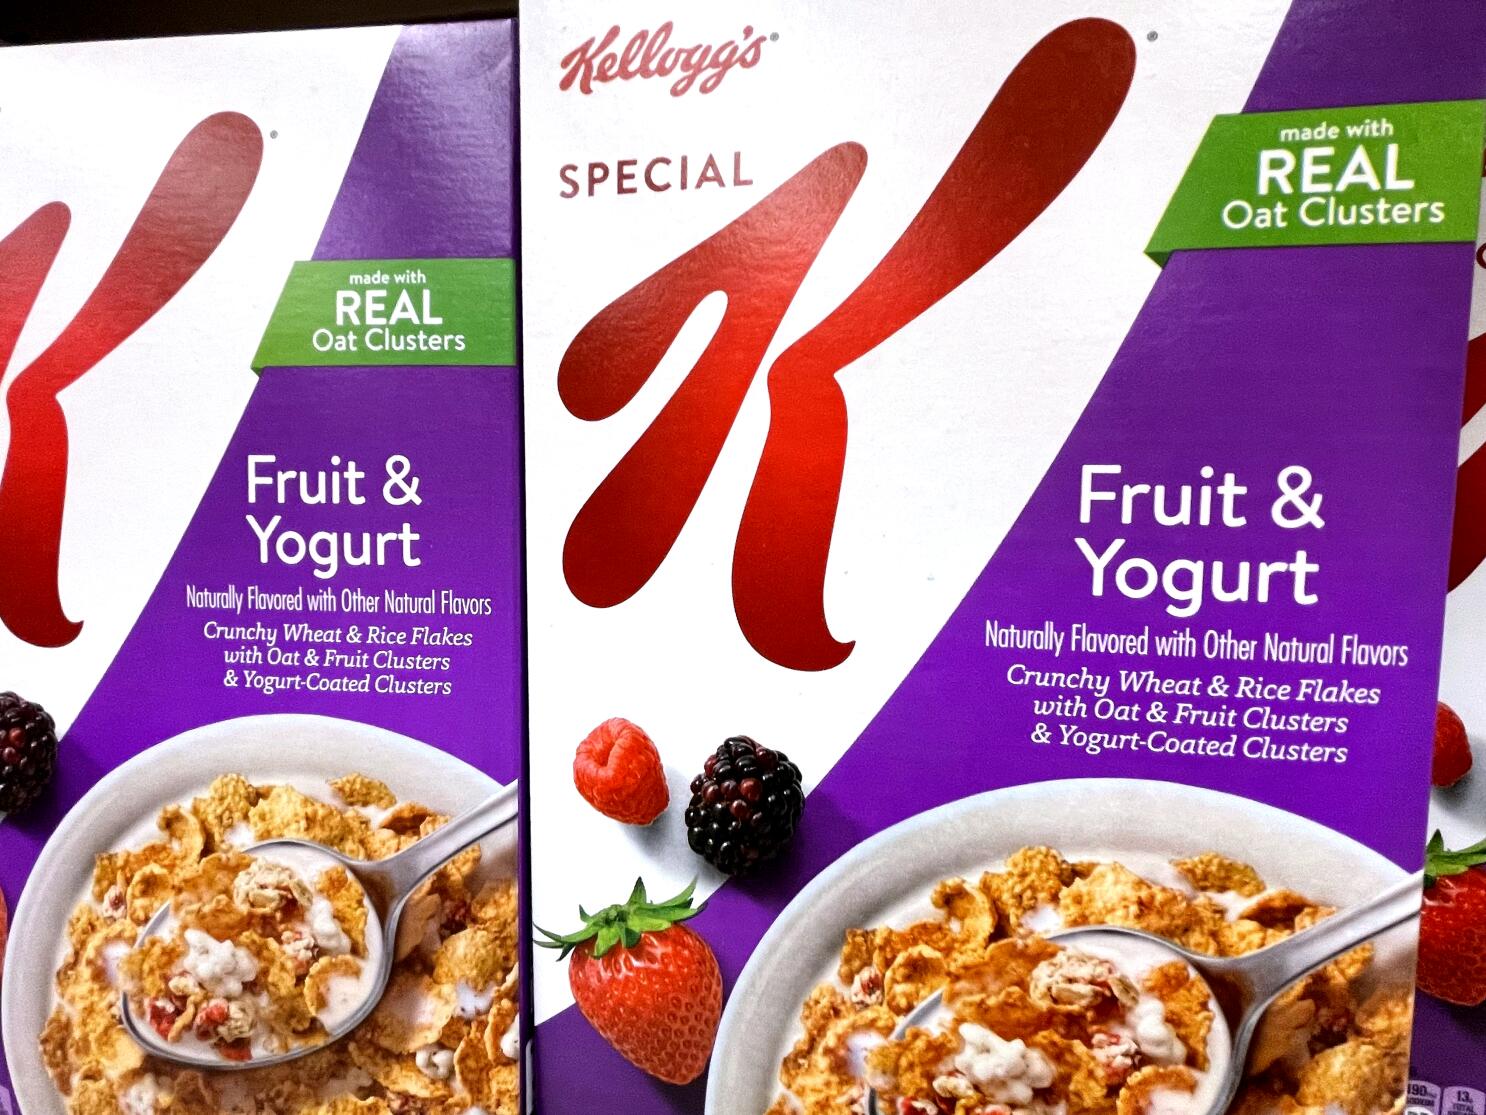 A Kellogg's box shows berries, the cereal has none. That's legal